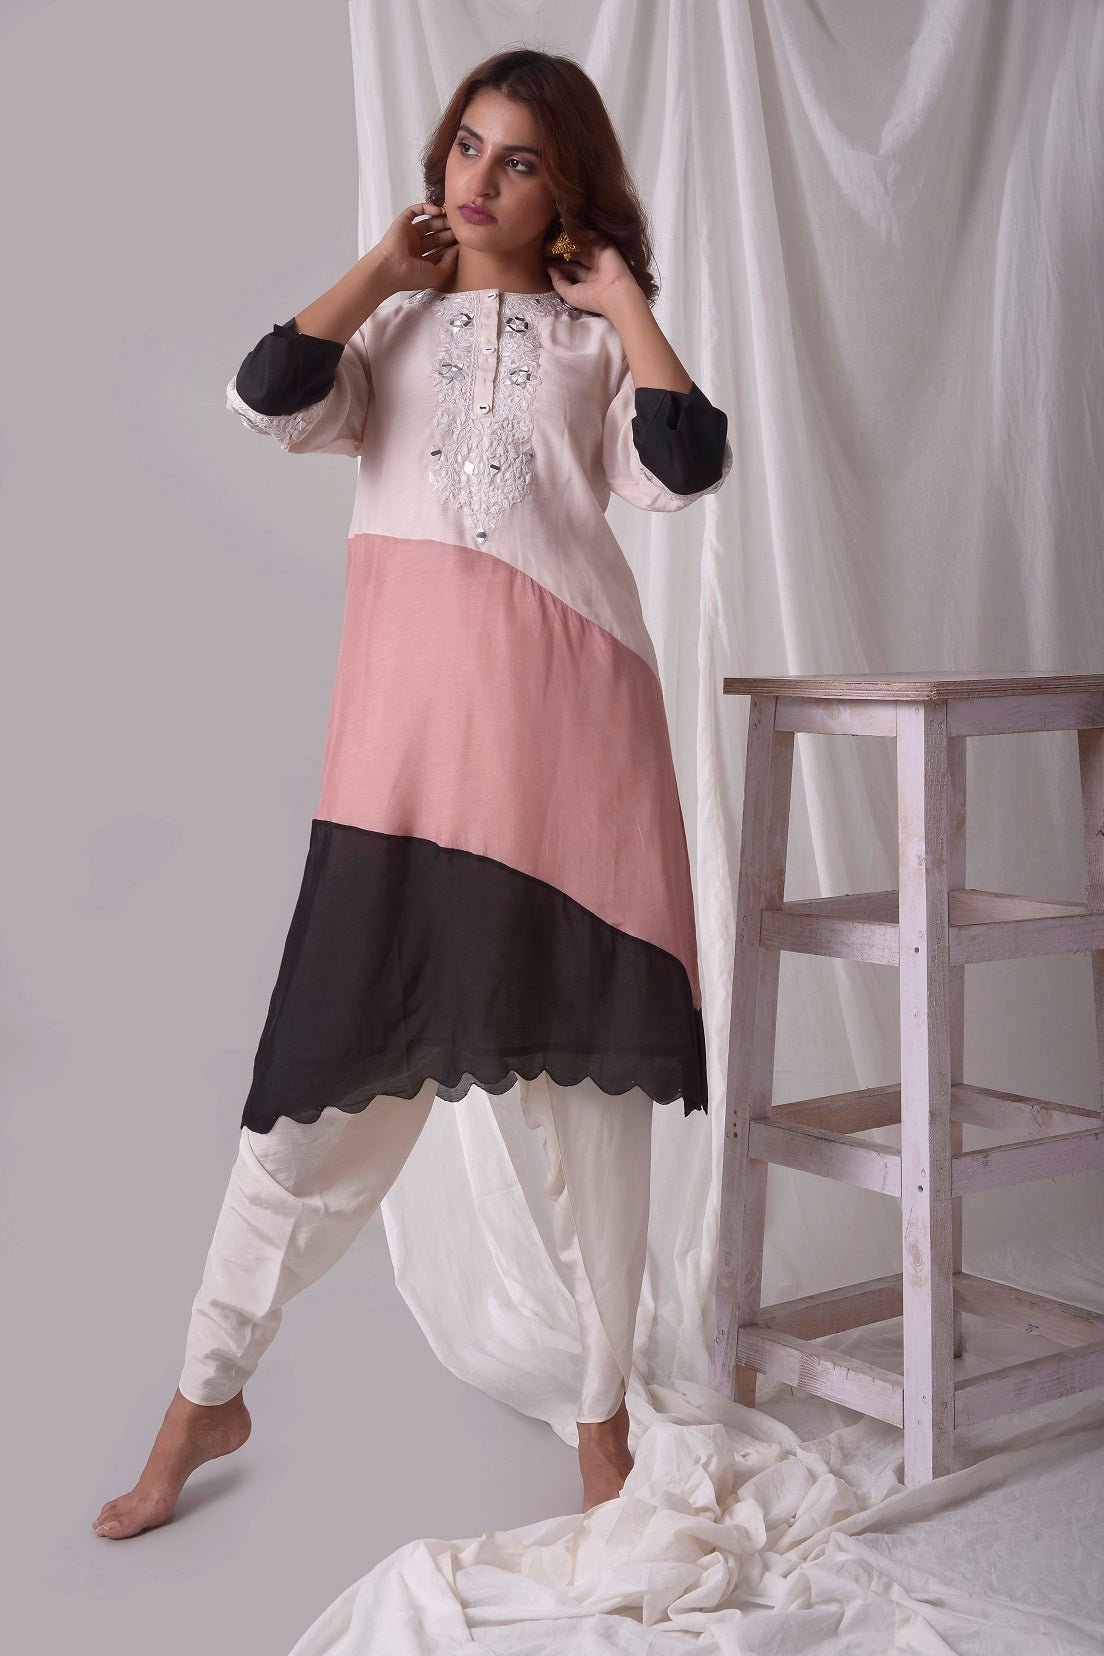 Buy off-white cotton silk suit online in USA. Suit has simple white work. Kurta has 3/4 length sleeves, white dhoti and its multi color with white, pink and black.Simple look makes it elegant. Be the talk of parties and weddings with exquisite designer gowns from Pure Elegance Indian clothing store in USA. Shop online now.-full view-2